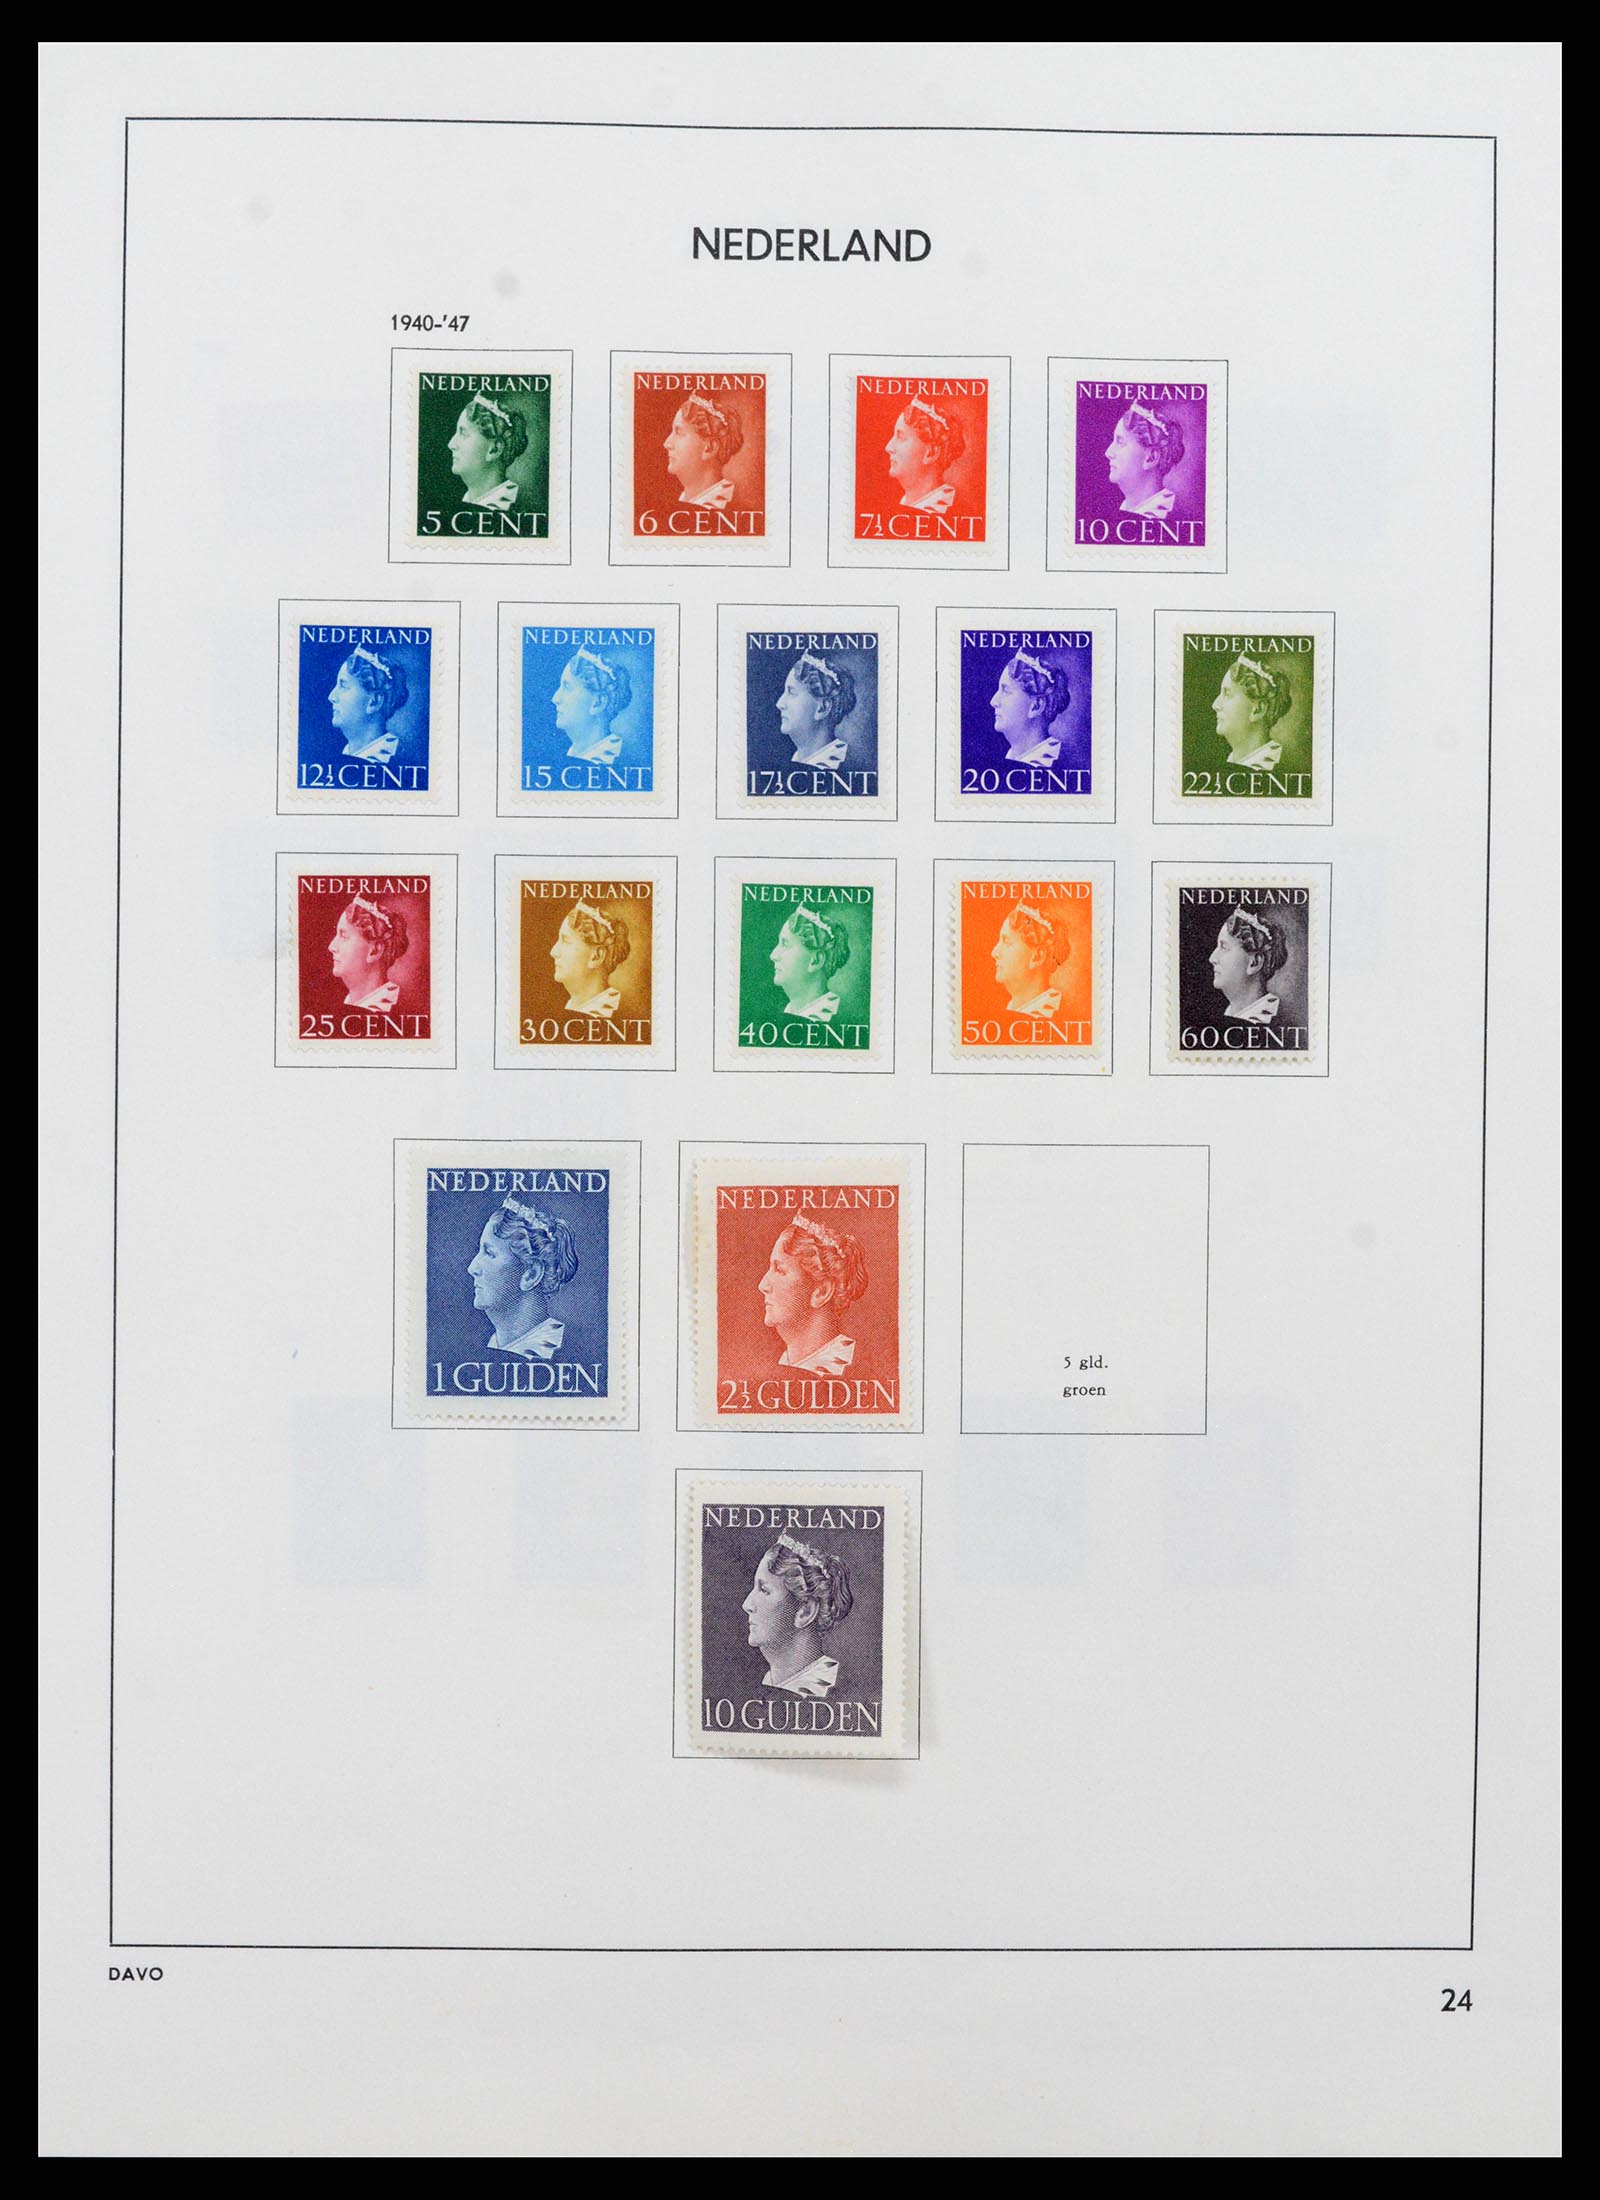 37713 024 - Stamp collection 37713 Netherlands 1864-1980.